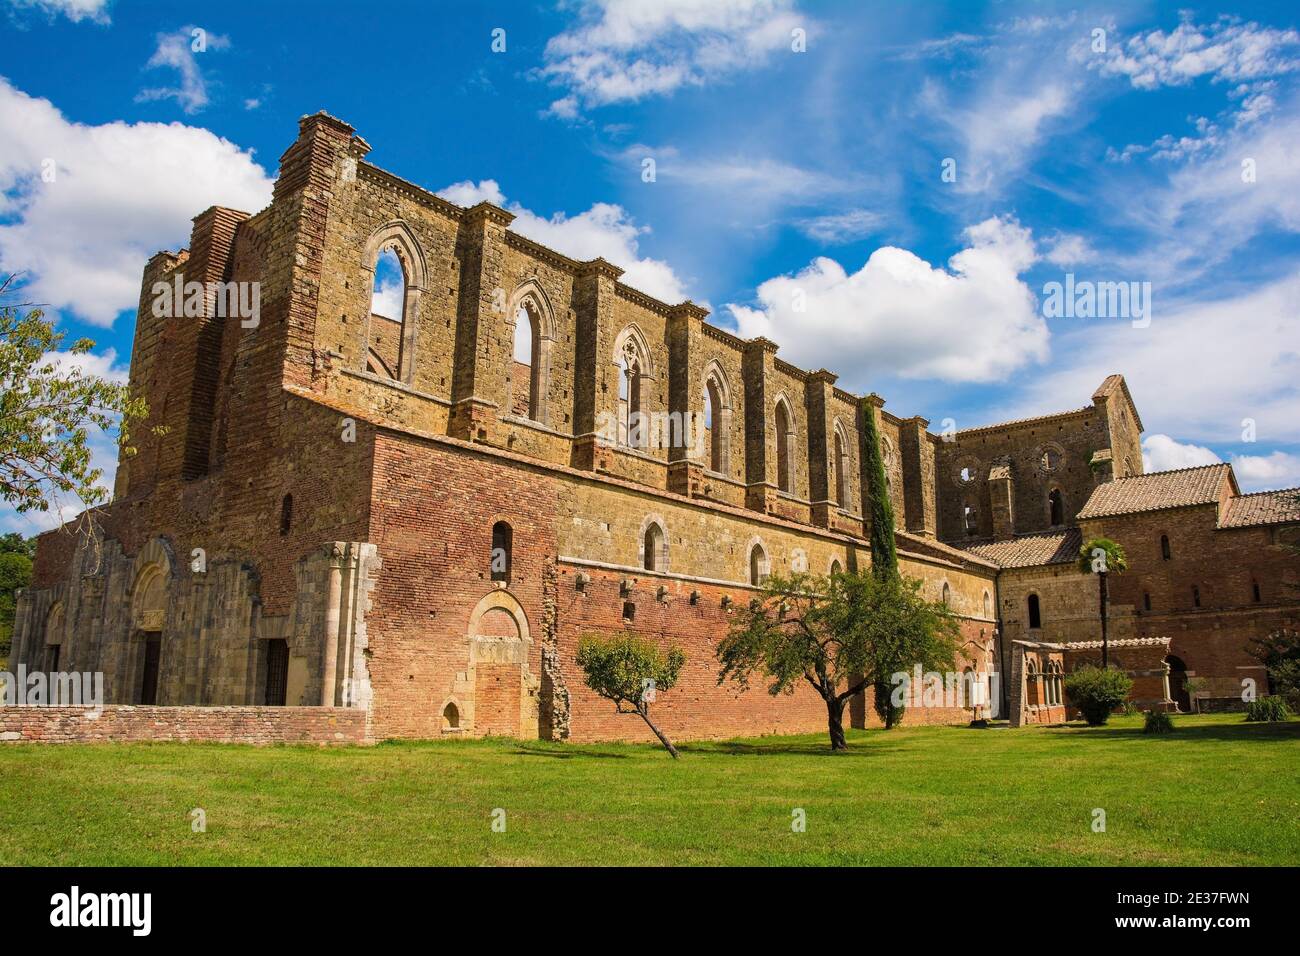 Chiusdino, Italy - 7th Sept 2020. A side view of the roofless San Galgano Abbey in Siena Province, Tuscany, showing arch or radius windows at the top Stock Photo